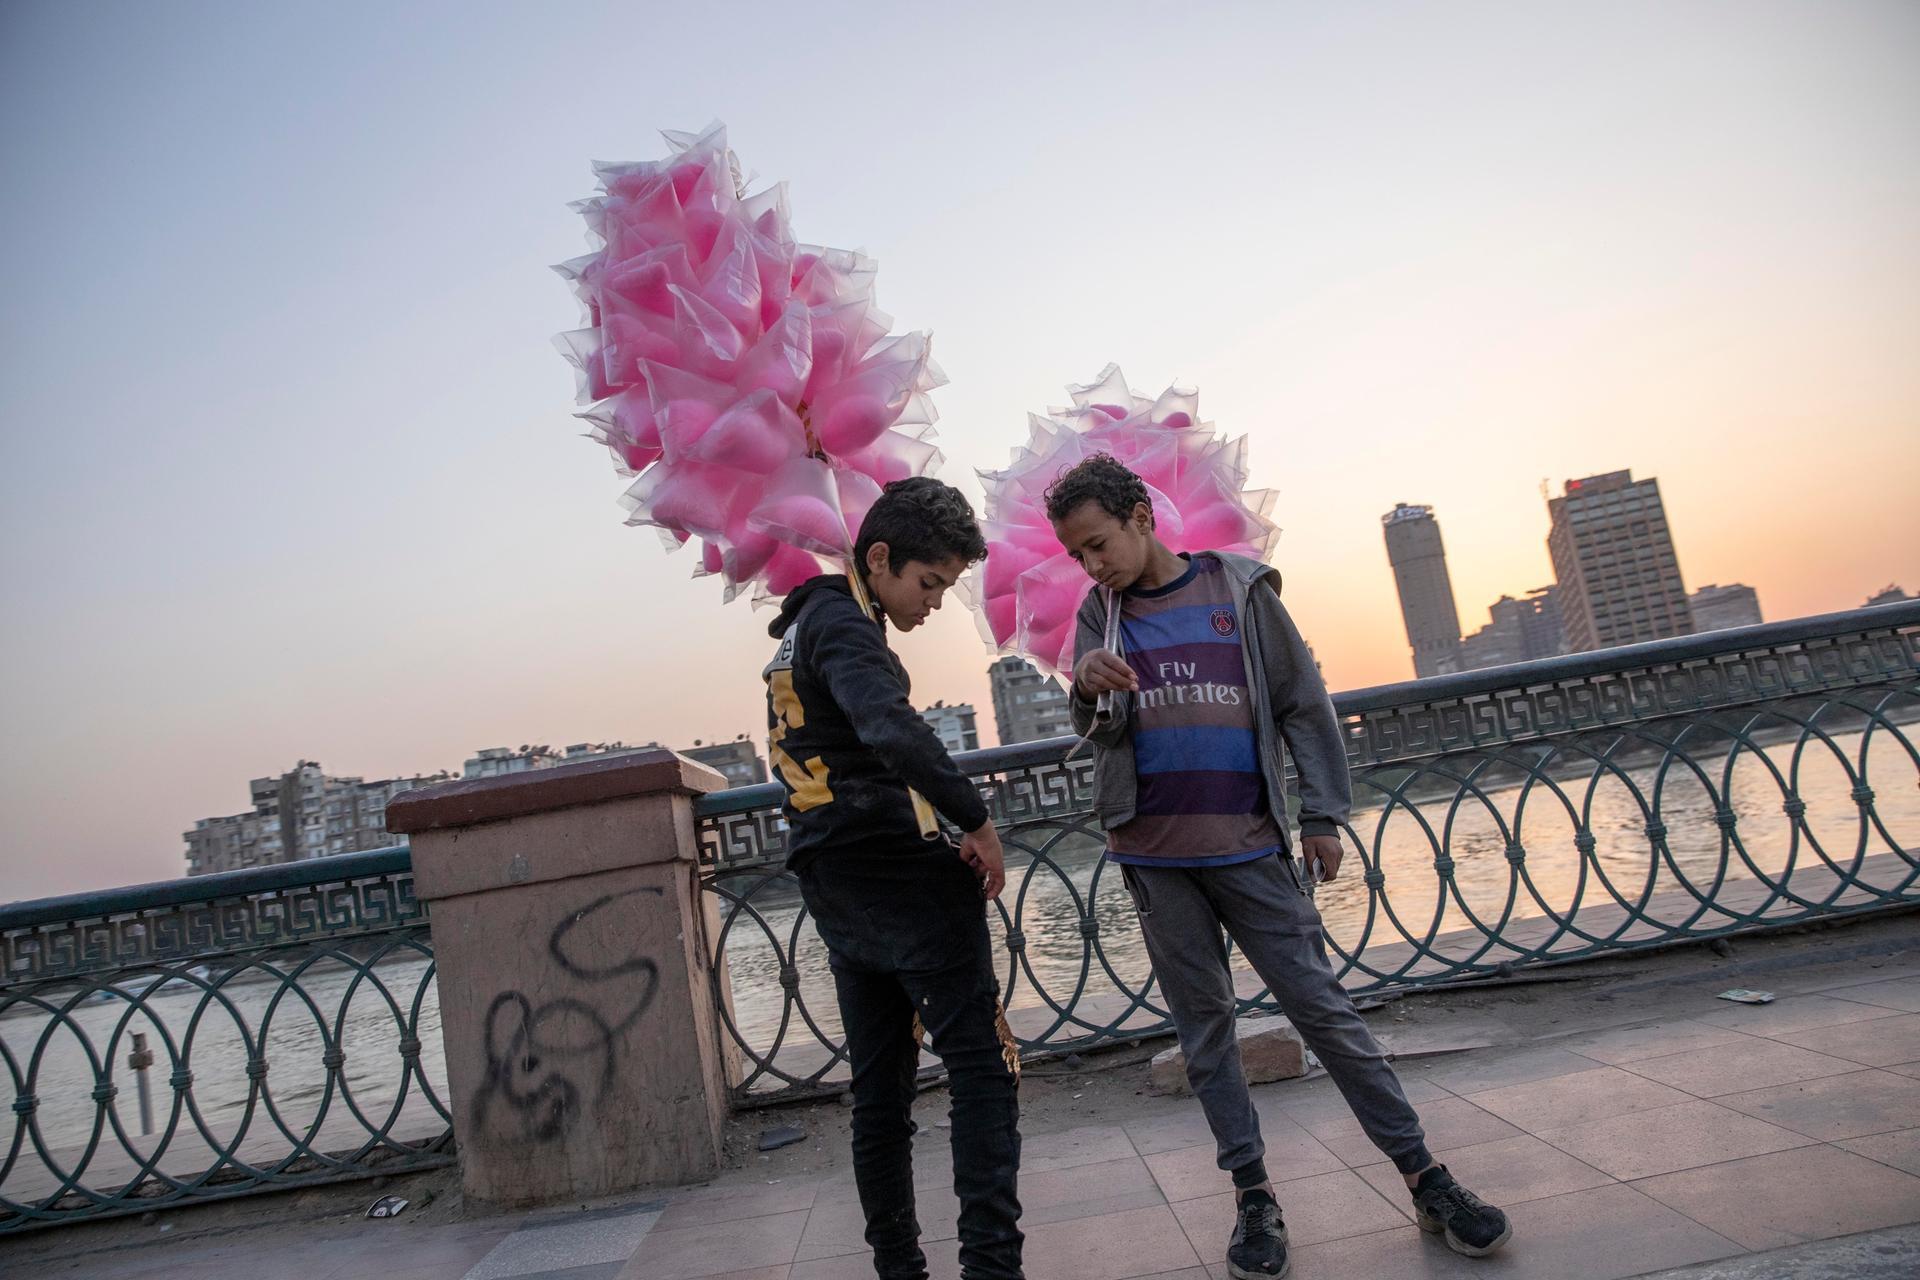 Boys sell cotton candy an hour ahead of the curfew imposed by the government as prevention measures due to the coronavirus outbreak, in Cairo, Egypt. AP Photo